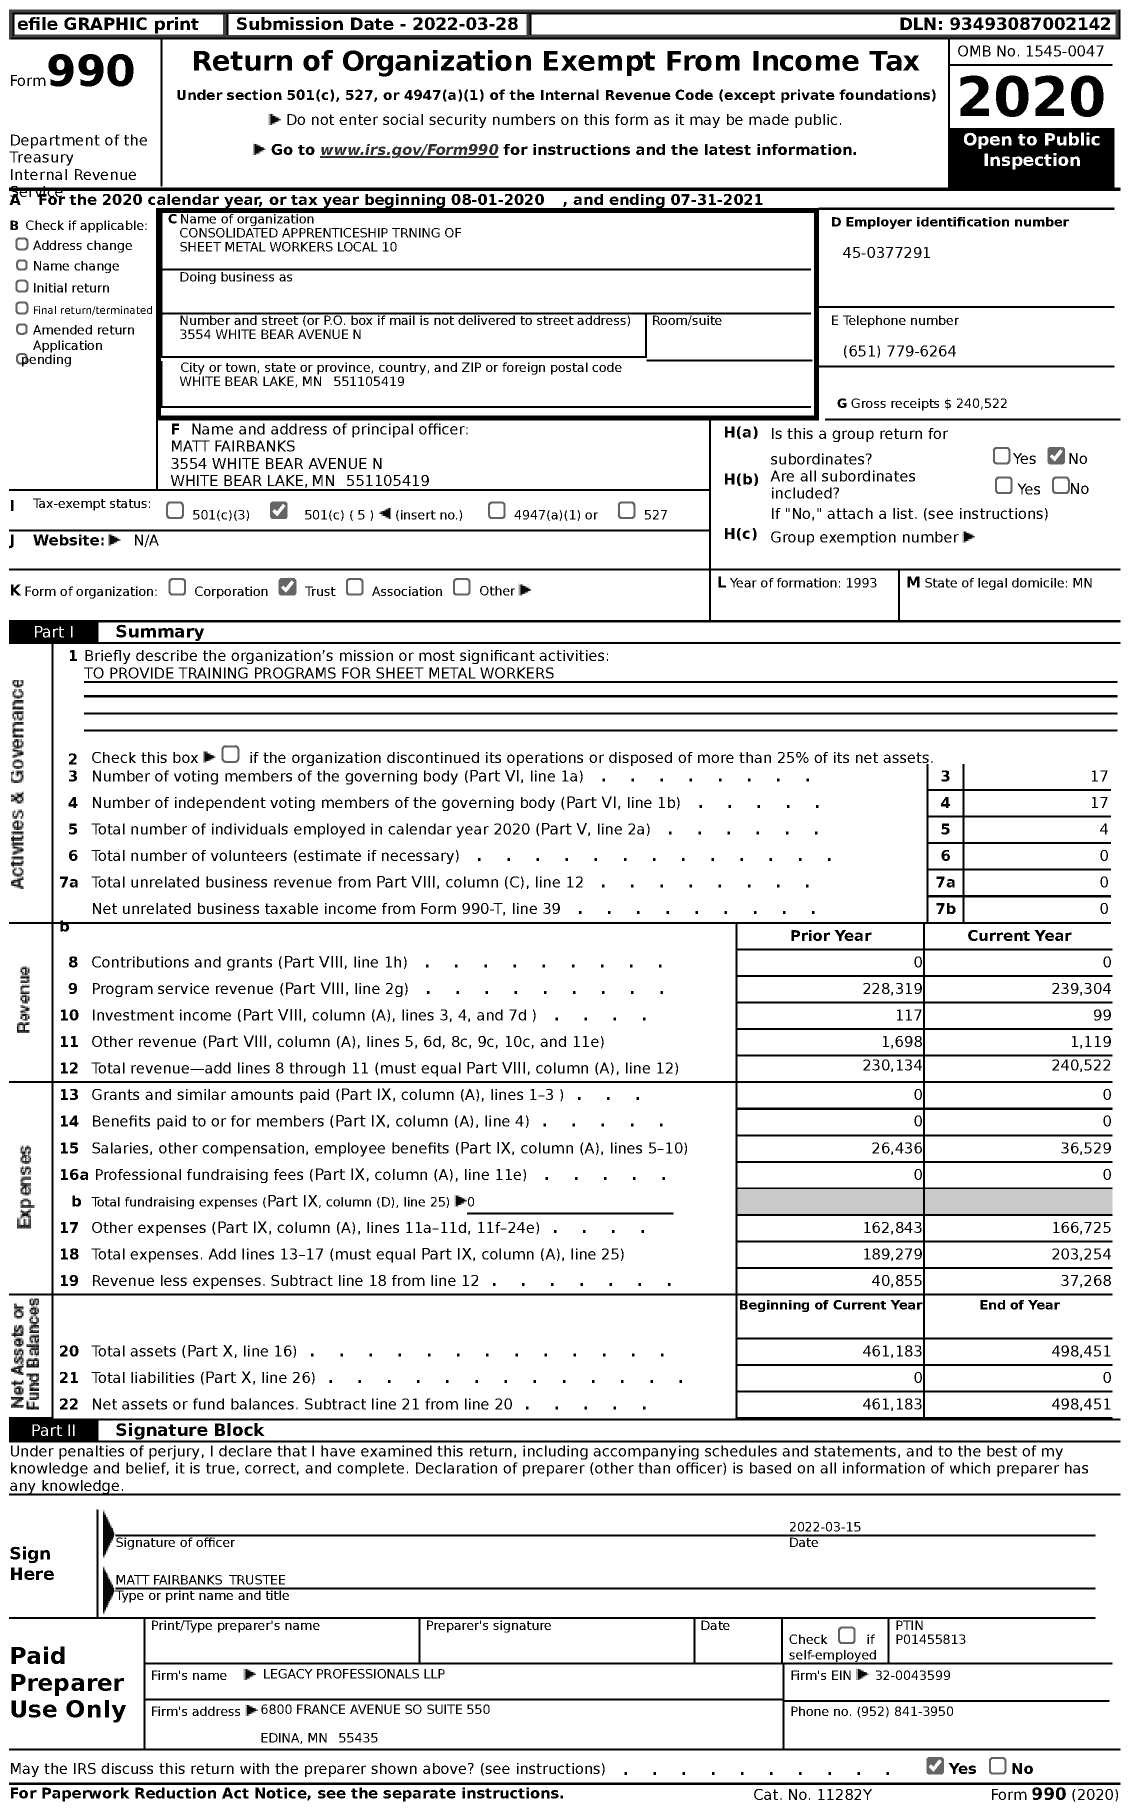 Image of first page of 2020 Form 990 for Consolidated Apprenticeship Trning of Sheet Metal Workers Local 10